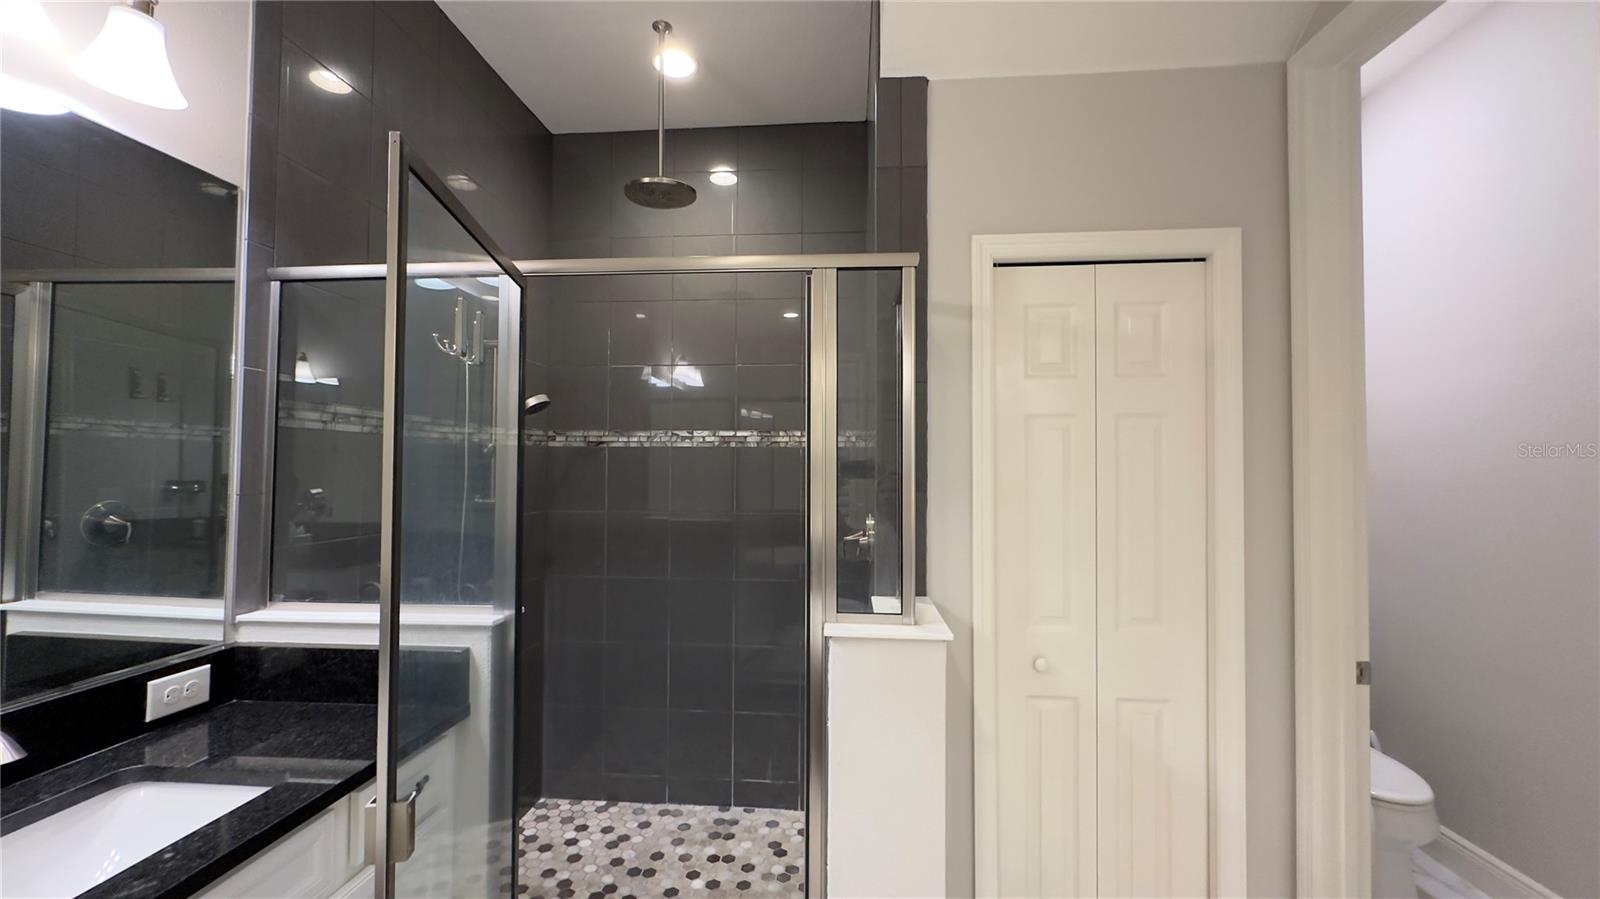 The large walk-in shower with combo rain showerhead and handheld shower wonderfully refreshes